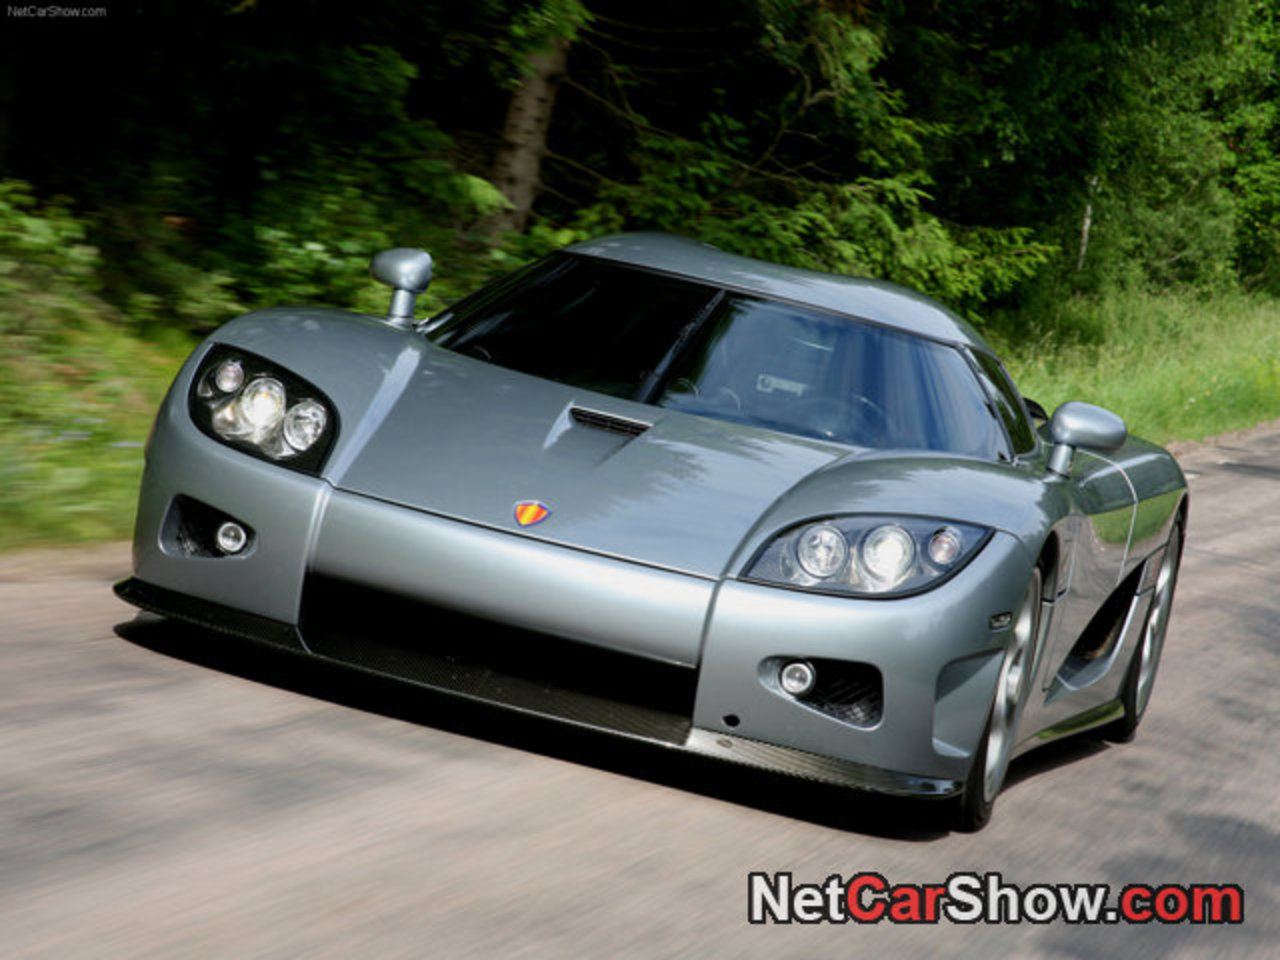 Koenigsegg CCX picture # 04 of 33, Front Angle, MY 2006, 1280x960